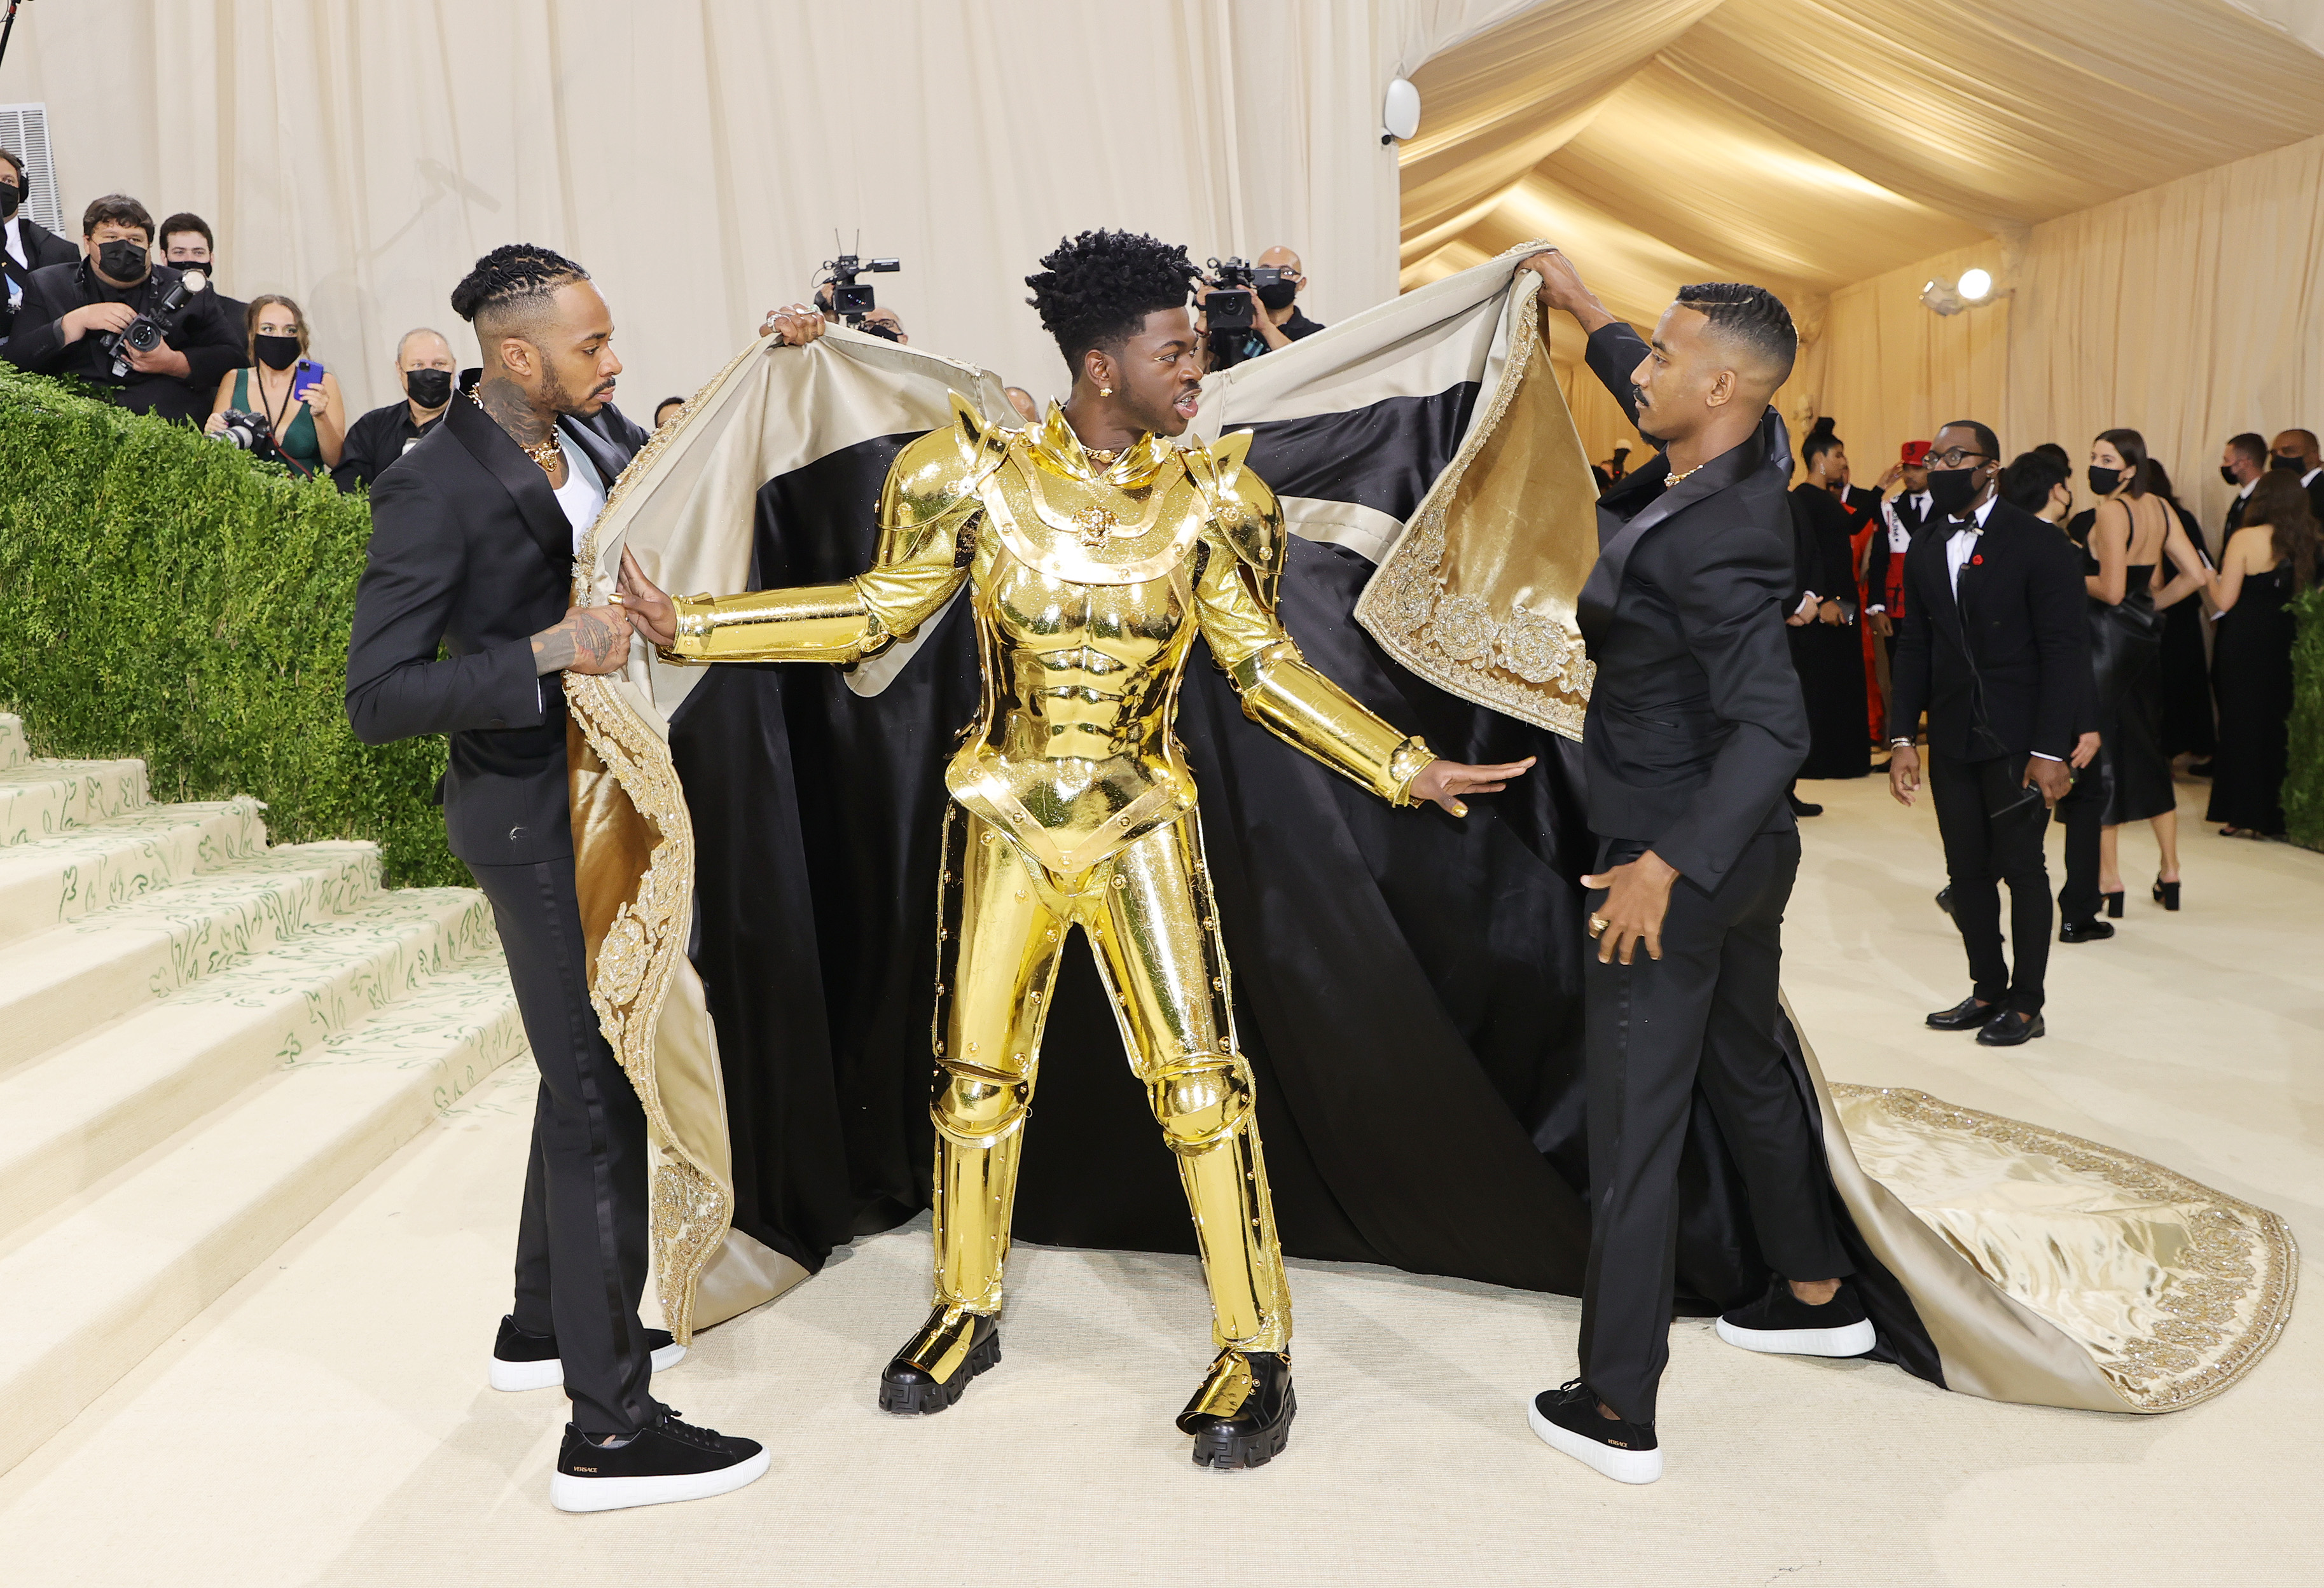 Lil Nas X attends The 2021 Met Gala Celebrating In America: A Lexicon Of Fashion at Metropolitan Museum of Art on Sept. 13, 2021, in New York City. (Mike Coppola/Getty Images)